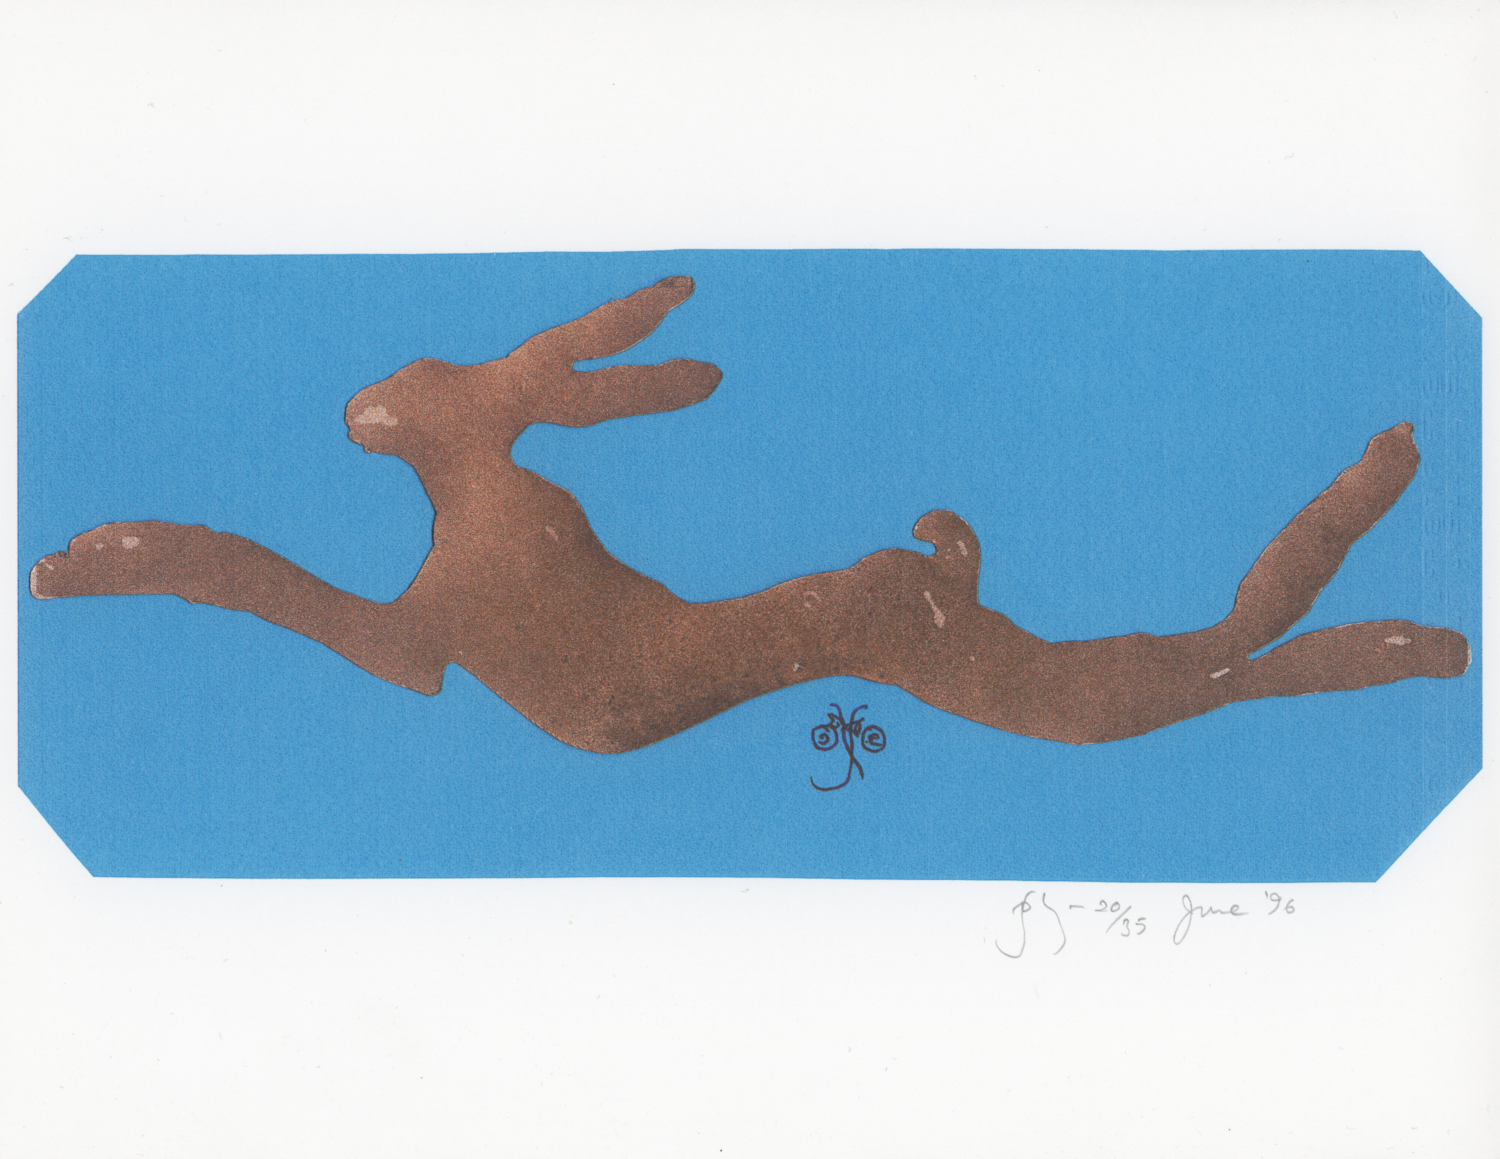 Leaping Hare (facing left)